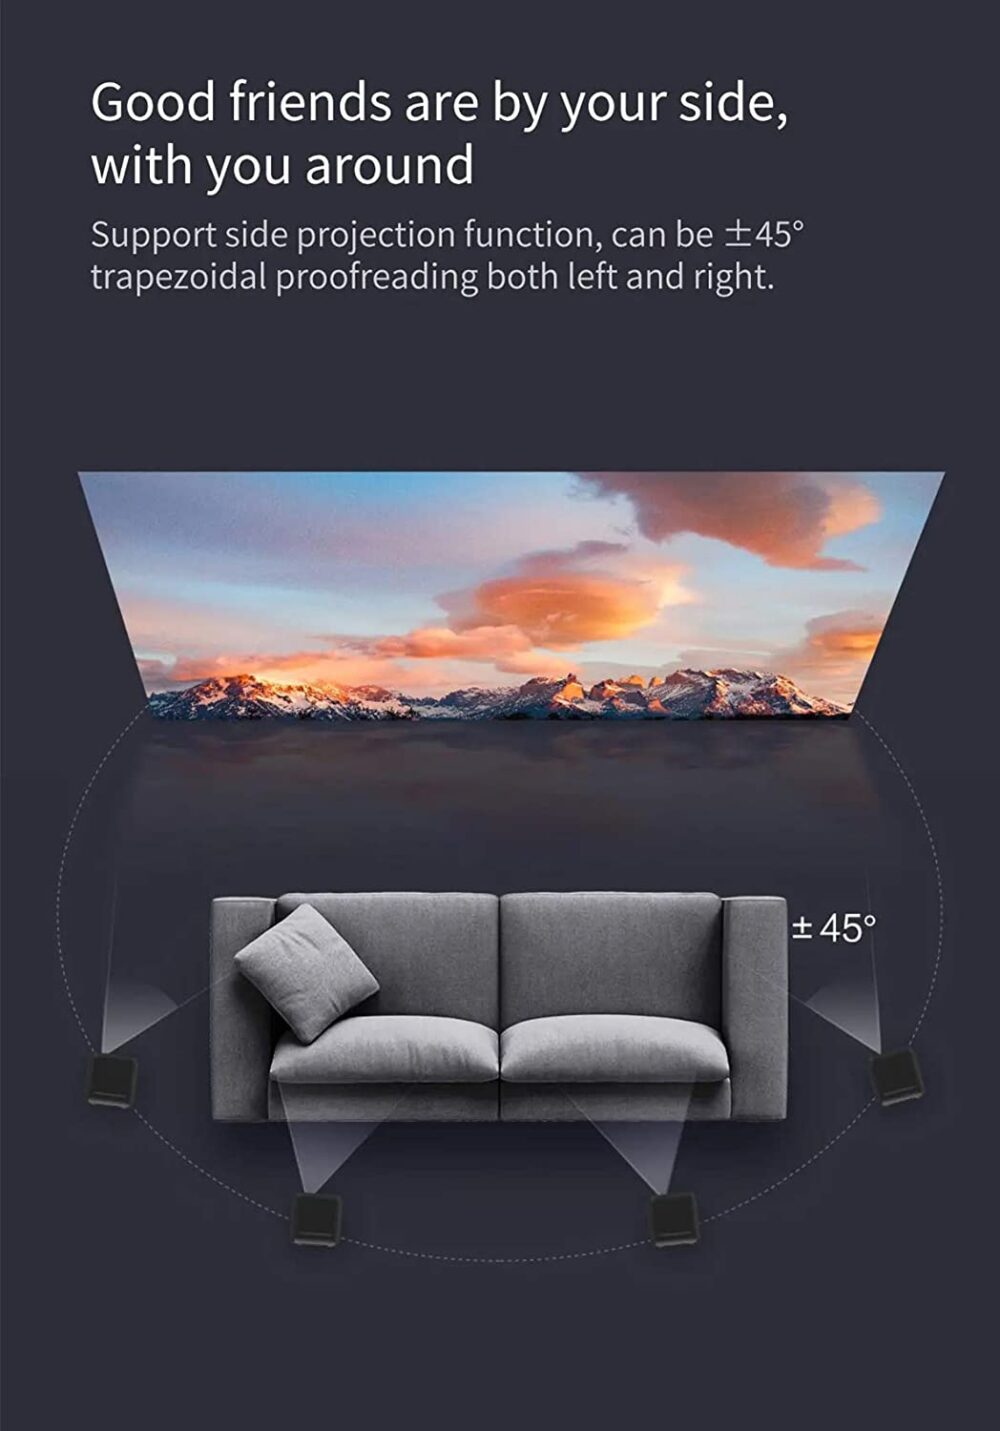 Xiaomi Fengmi Mini Projector Full HD DLP Portable 1920*1080 Support 4K Video Screen 550 ANSI WIFI Bluetooth TV for Home Cinema and Gaming By PRIME TECH ™